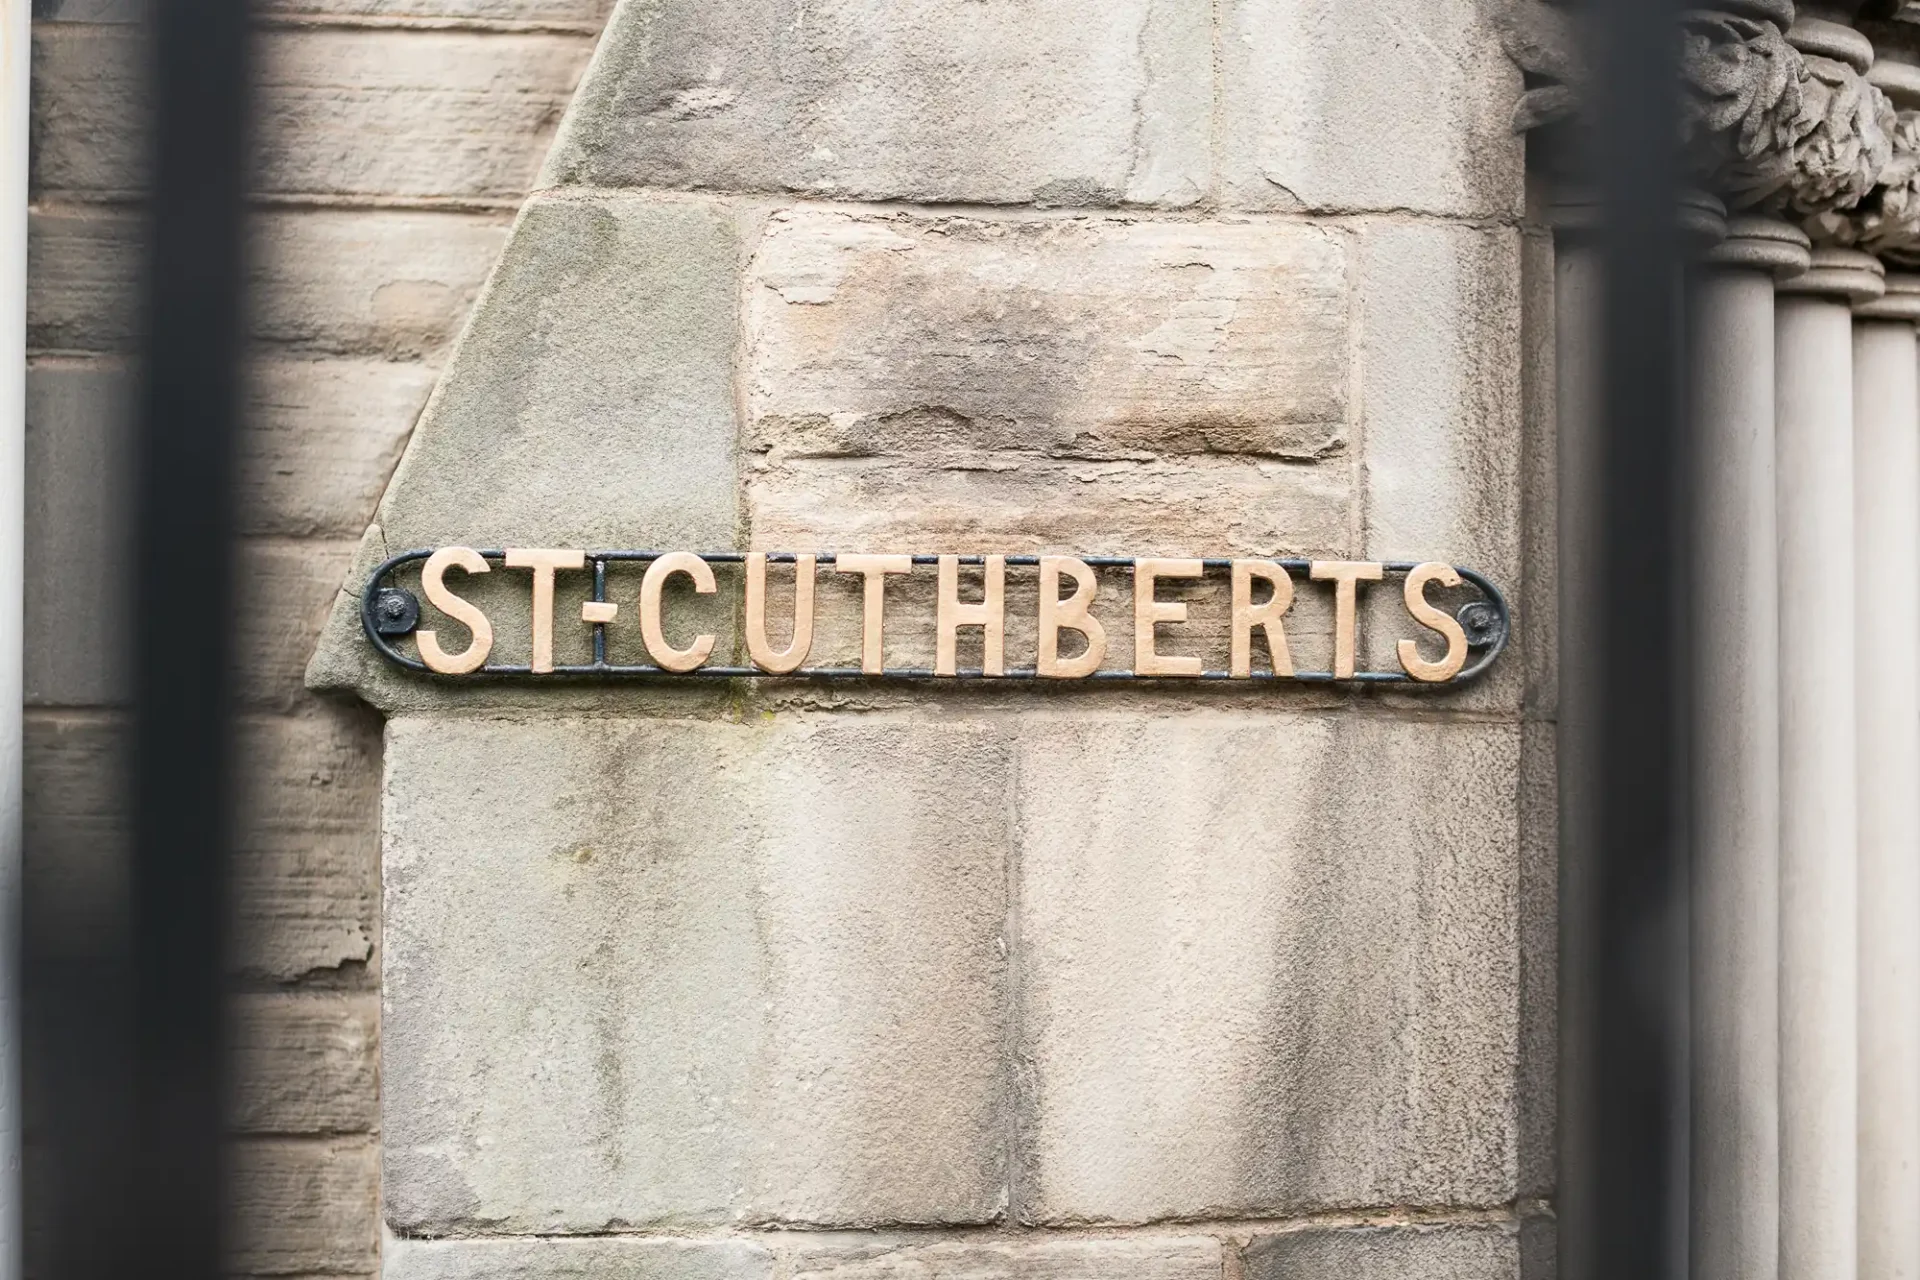 A metal plaque reading "stcuthberts" mounted on a stone wall, viewed through blurred vertical bars in the foreground.